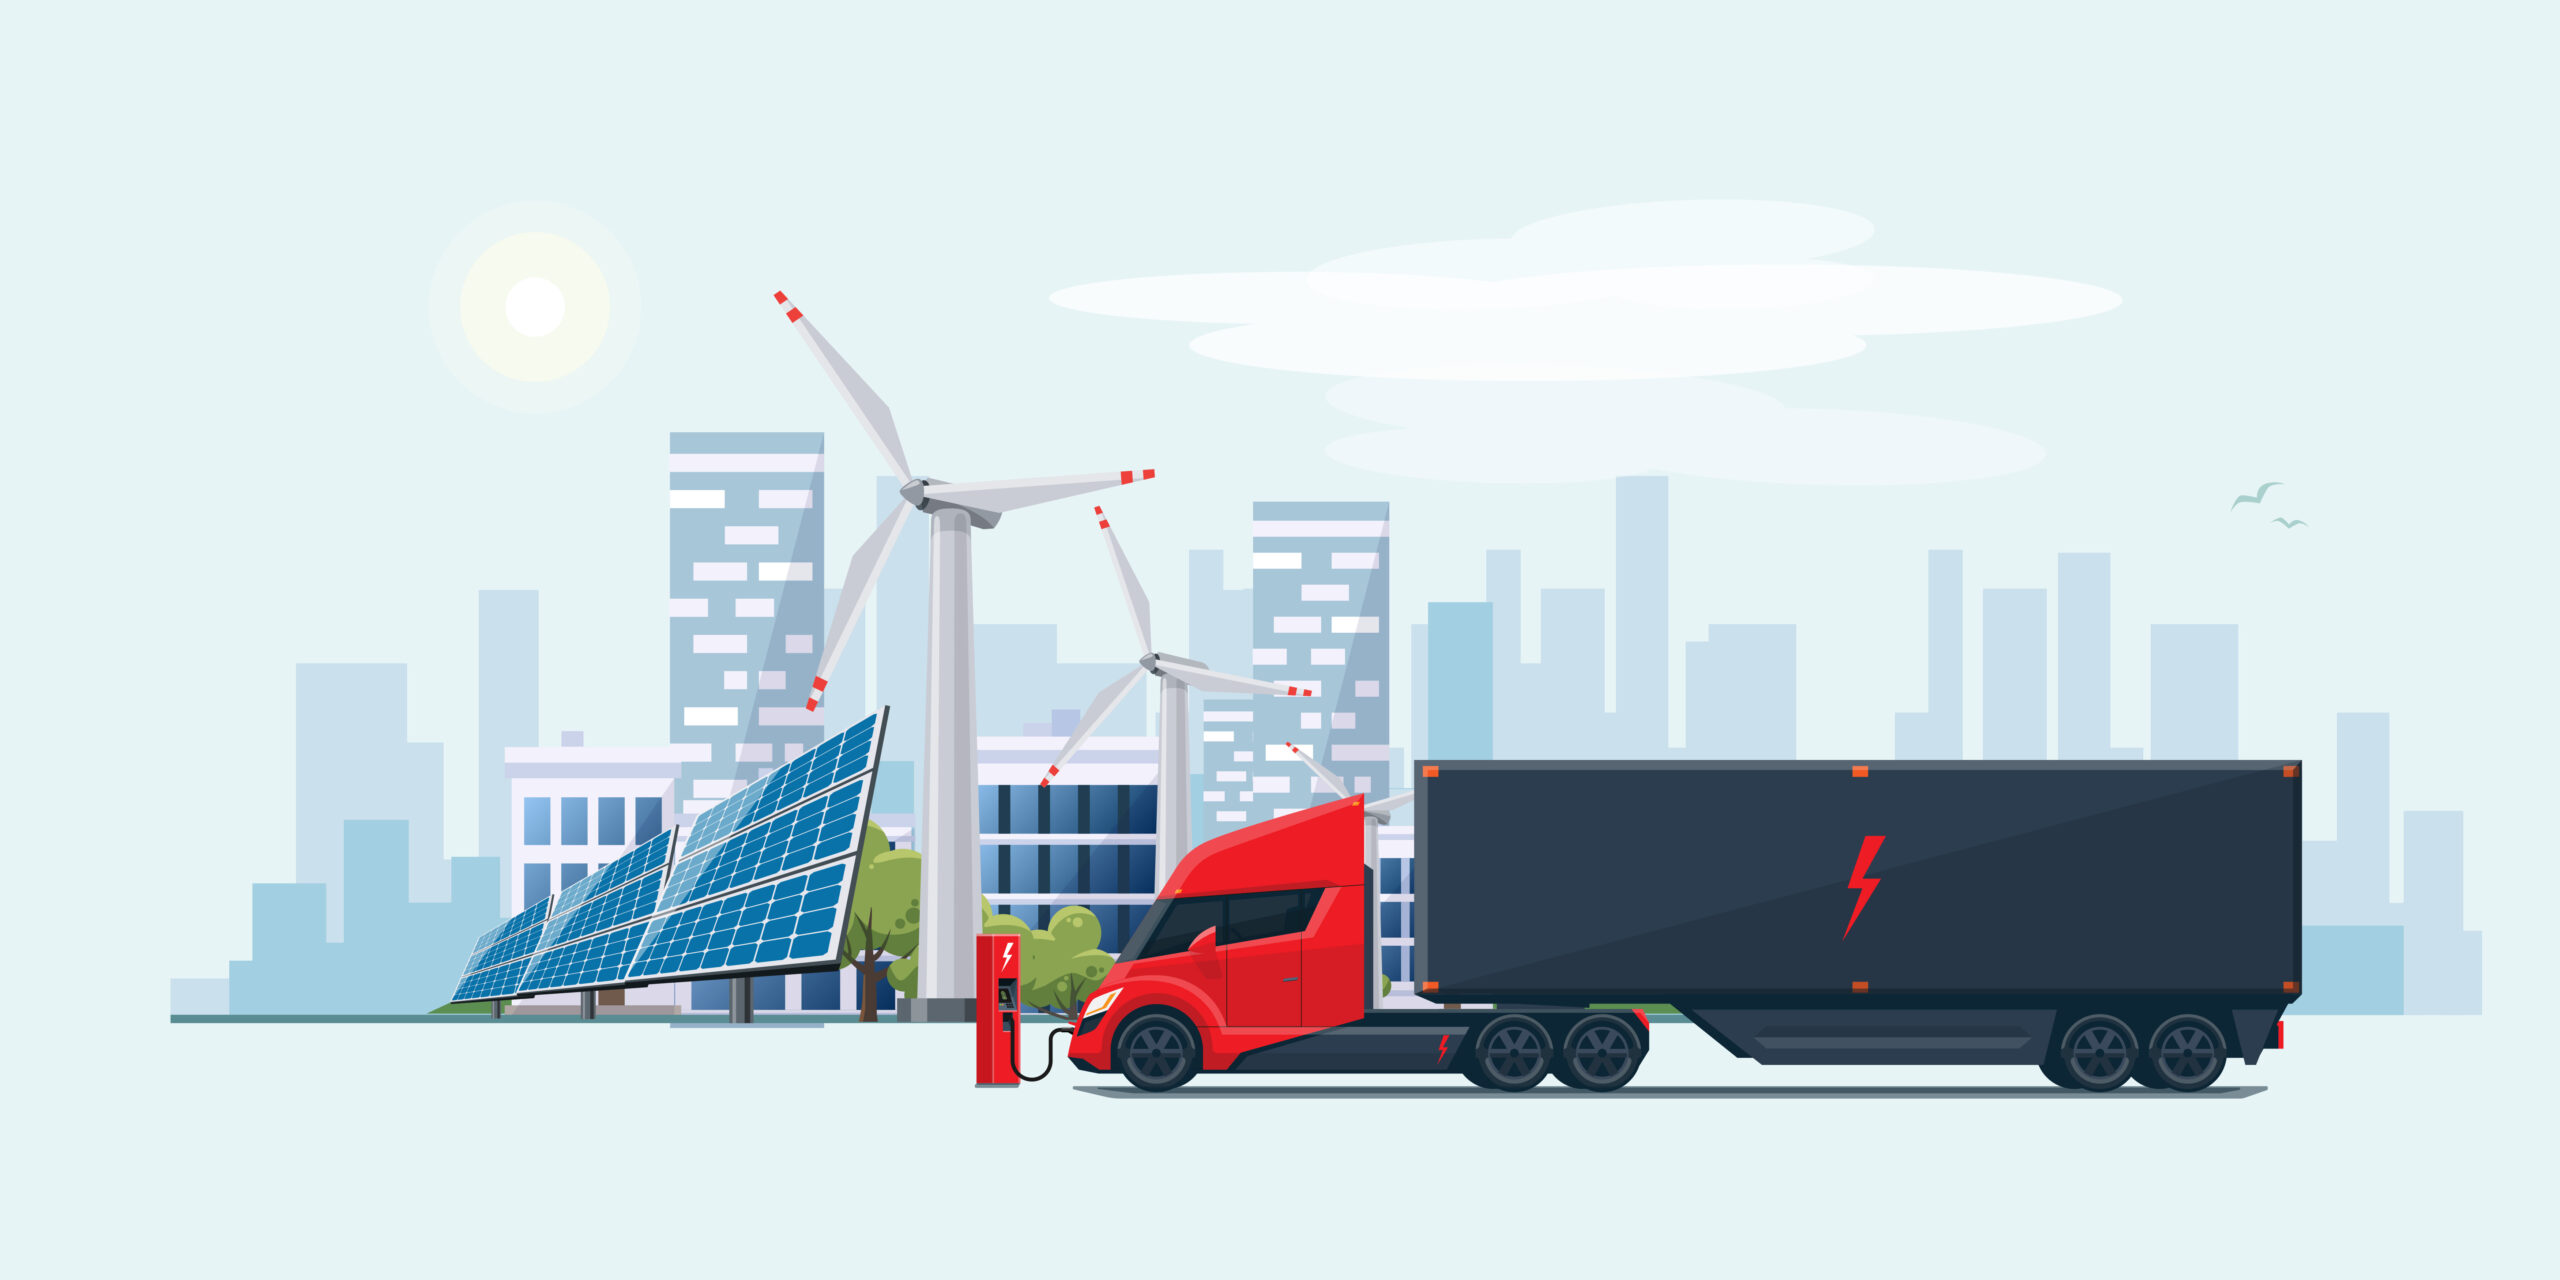 Electric freight truck charging at station illustration